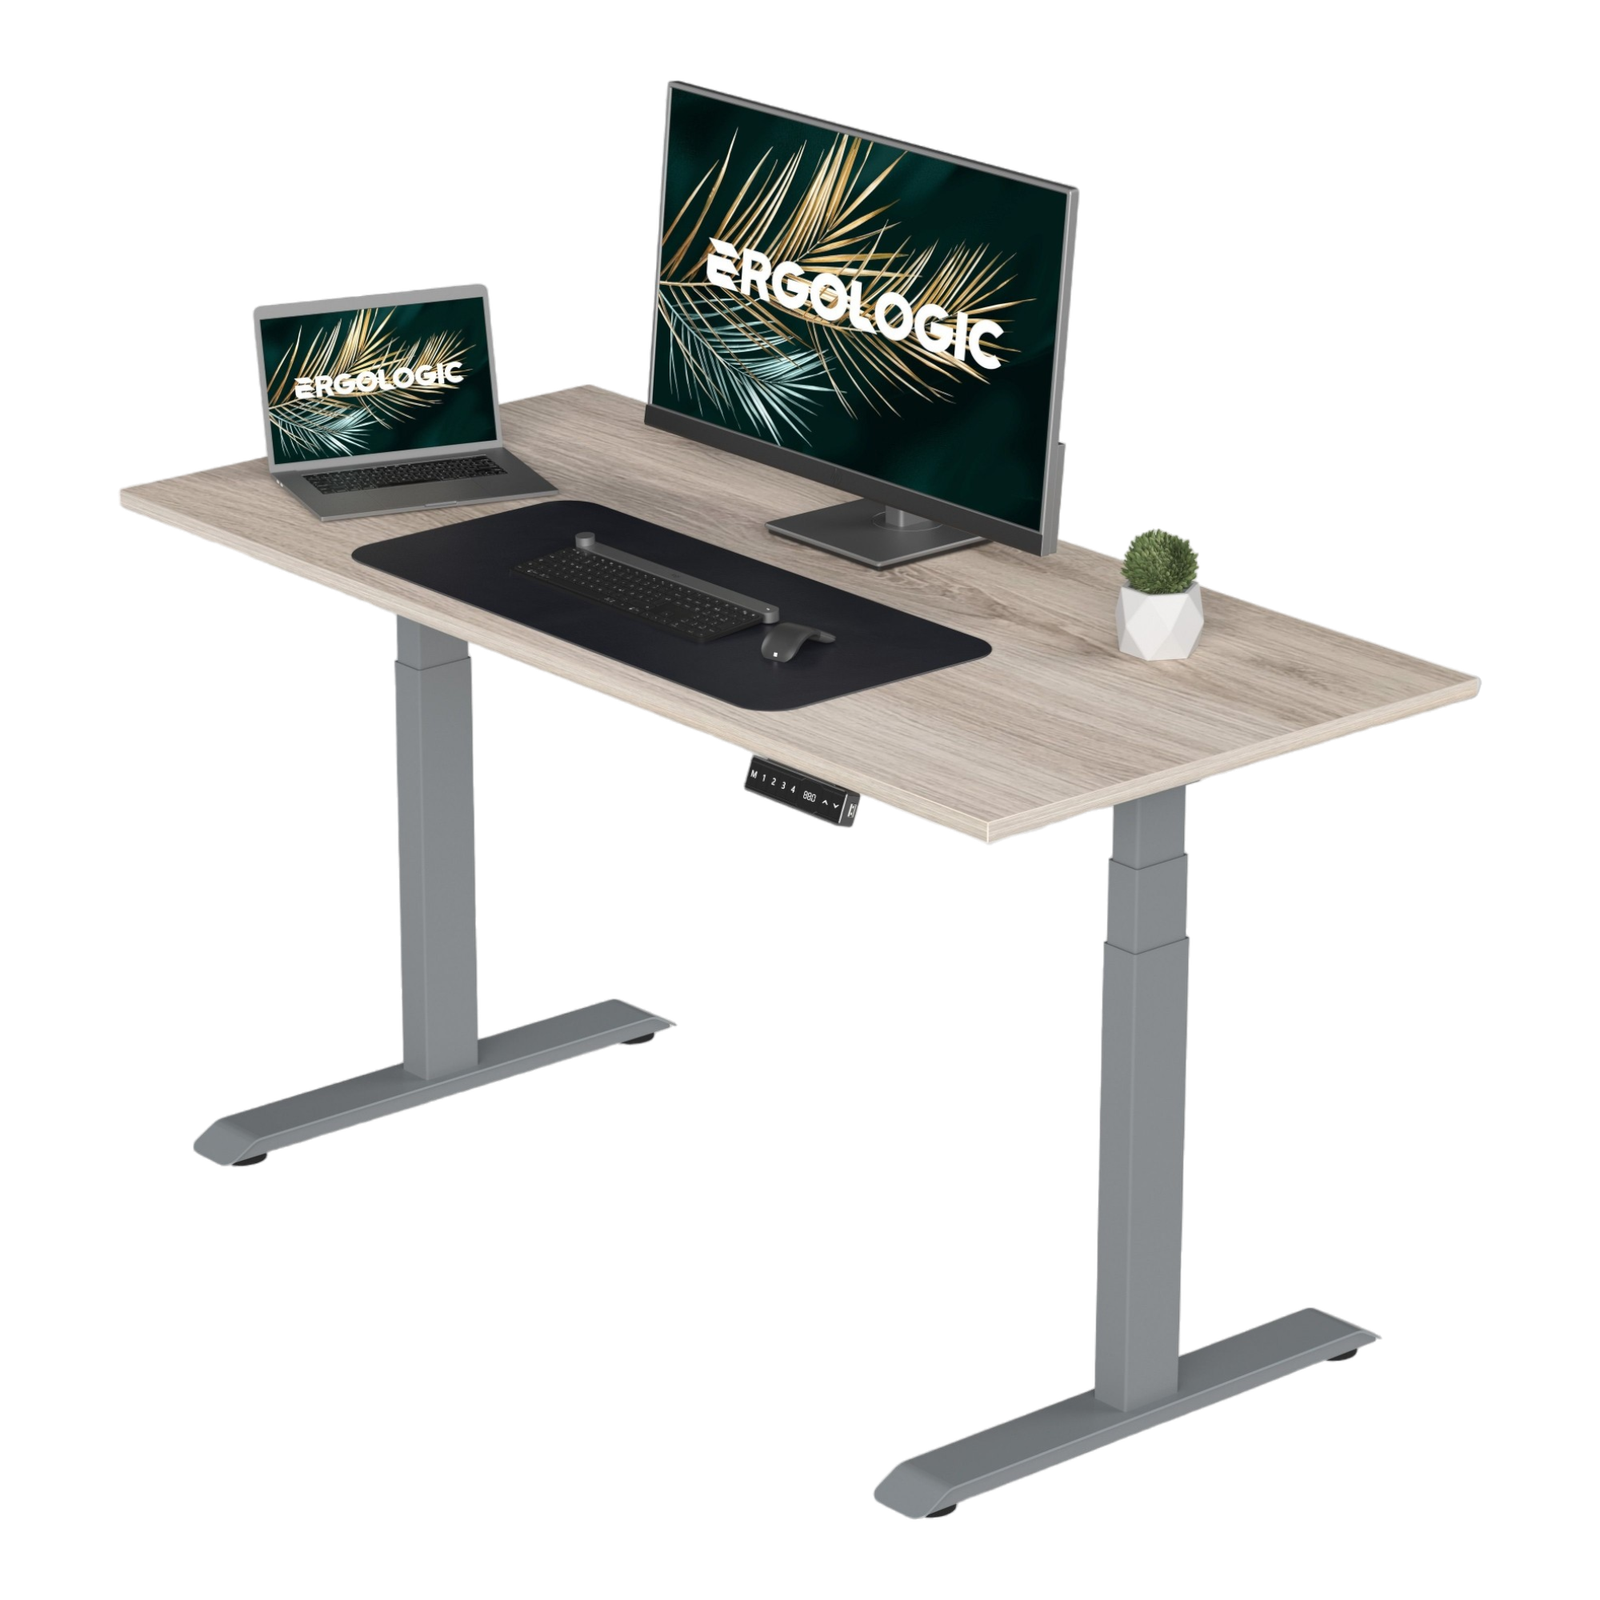 EL002-SGR-P-LO-1200X600 Ergologic imported Dual Motor 3 Stage GREY Color Desk Electric hydraulic Height Standing Adjustable Desk Frame Two Stage office motorized automatic Table Premium Quality